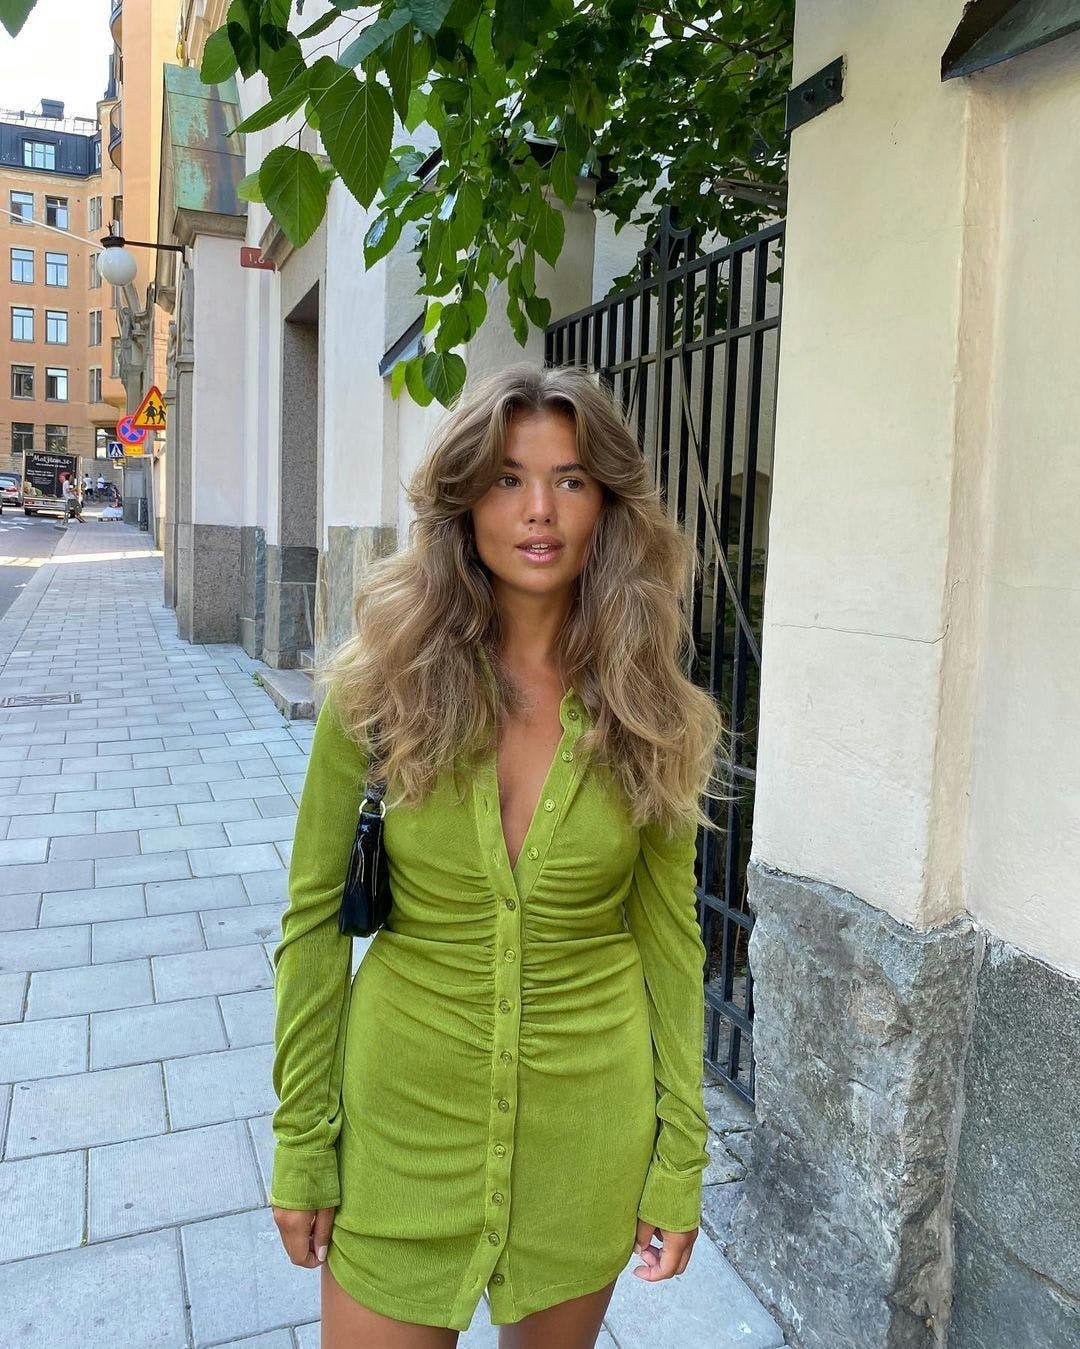 Fashion blogger with voluminous wavy hair wearing a green ruched mini dress.